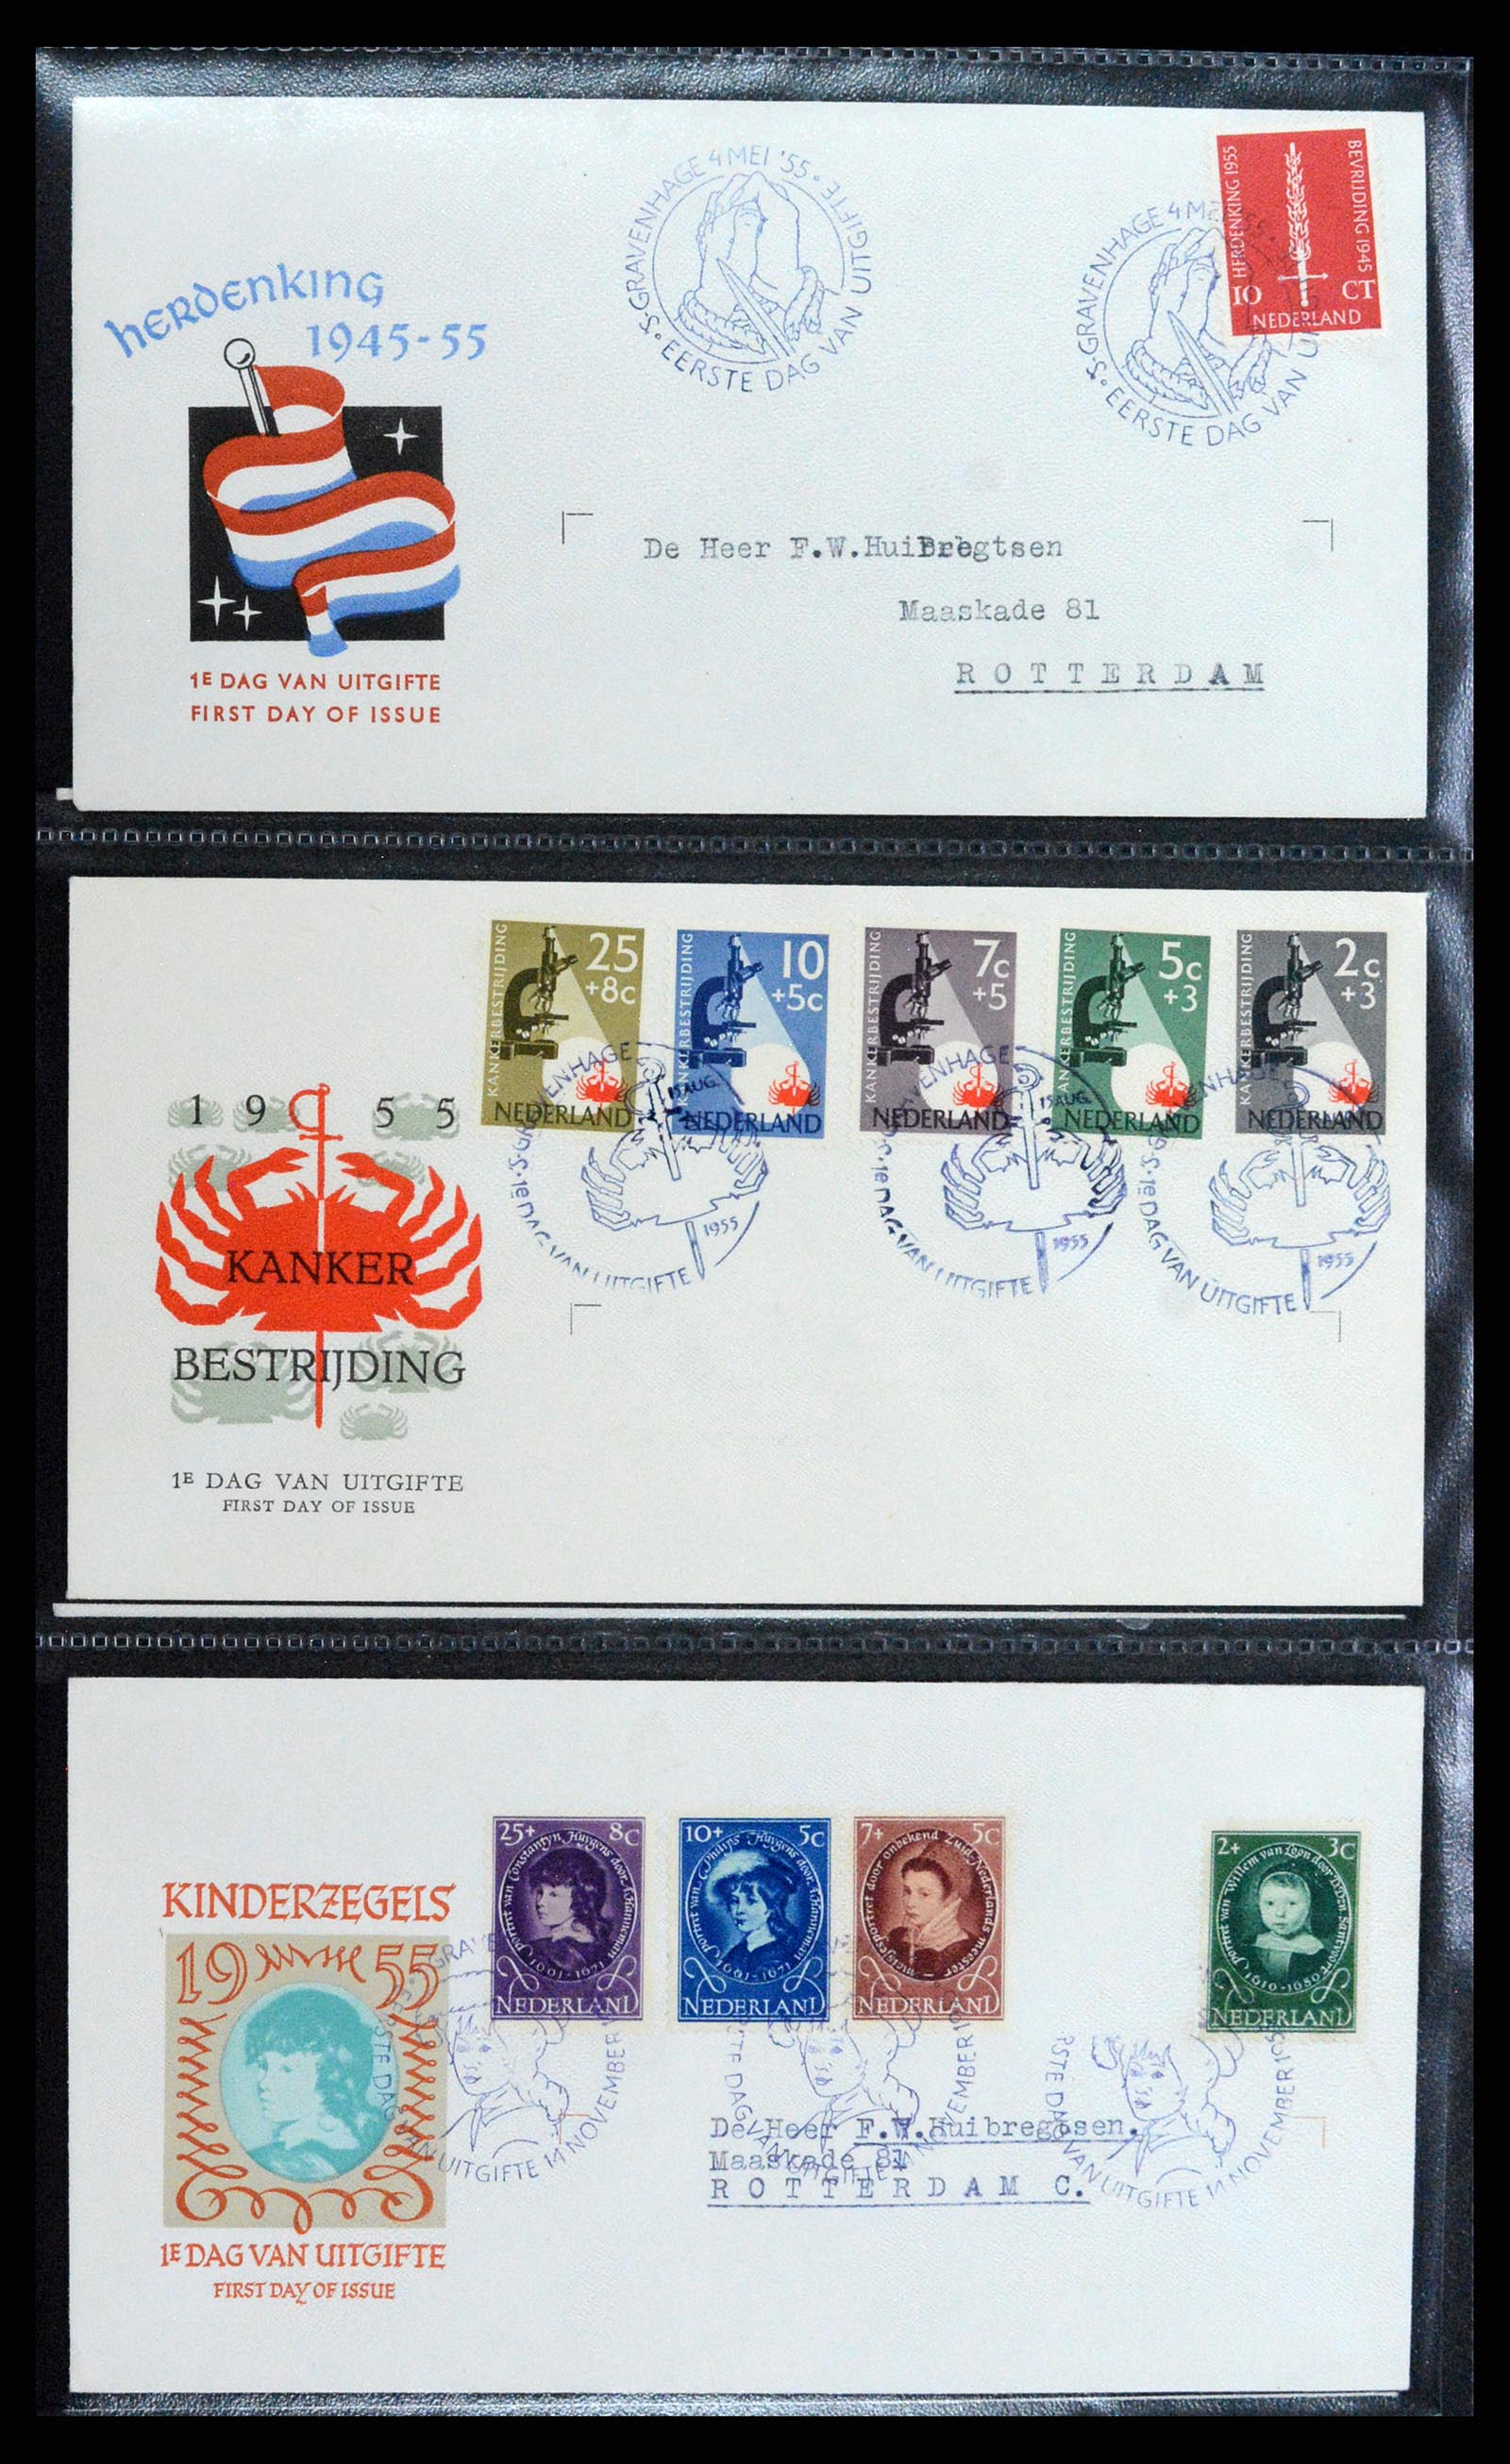 37710 010 - Stamp collection 37710 Netherlands FDC's 1949-1976.